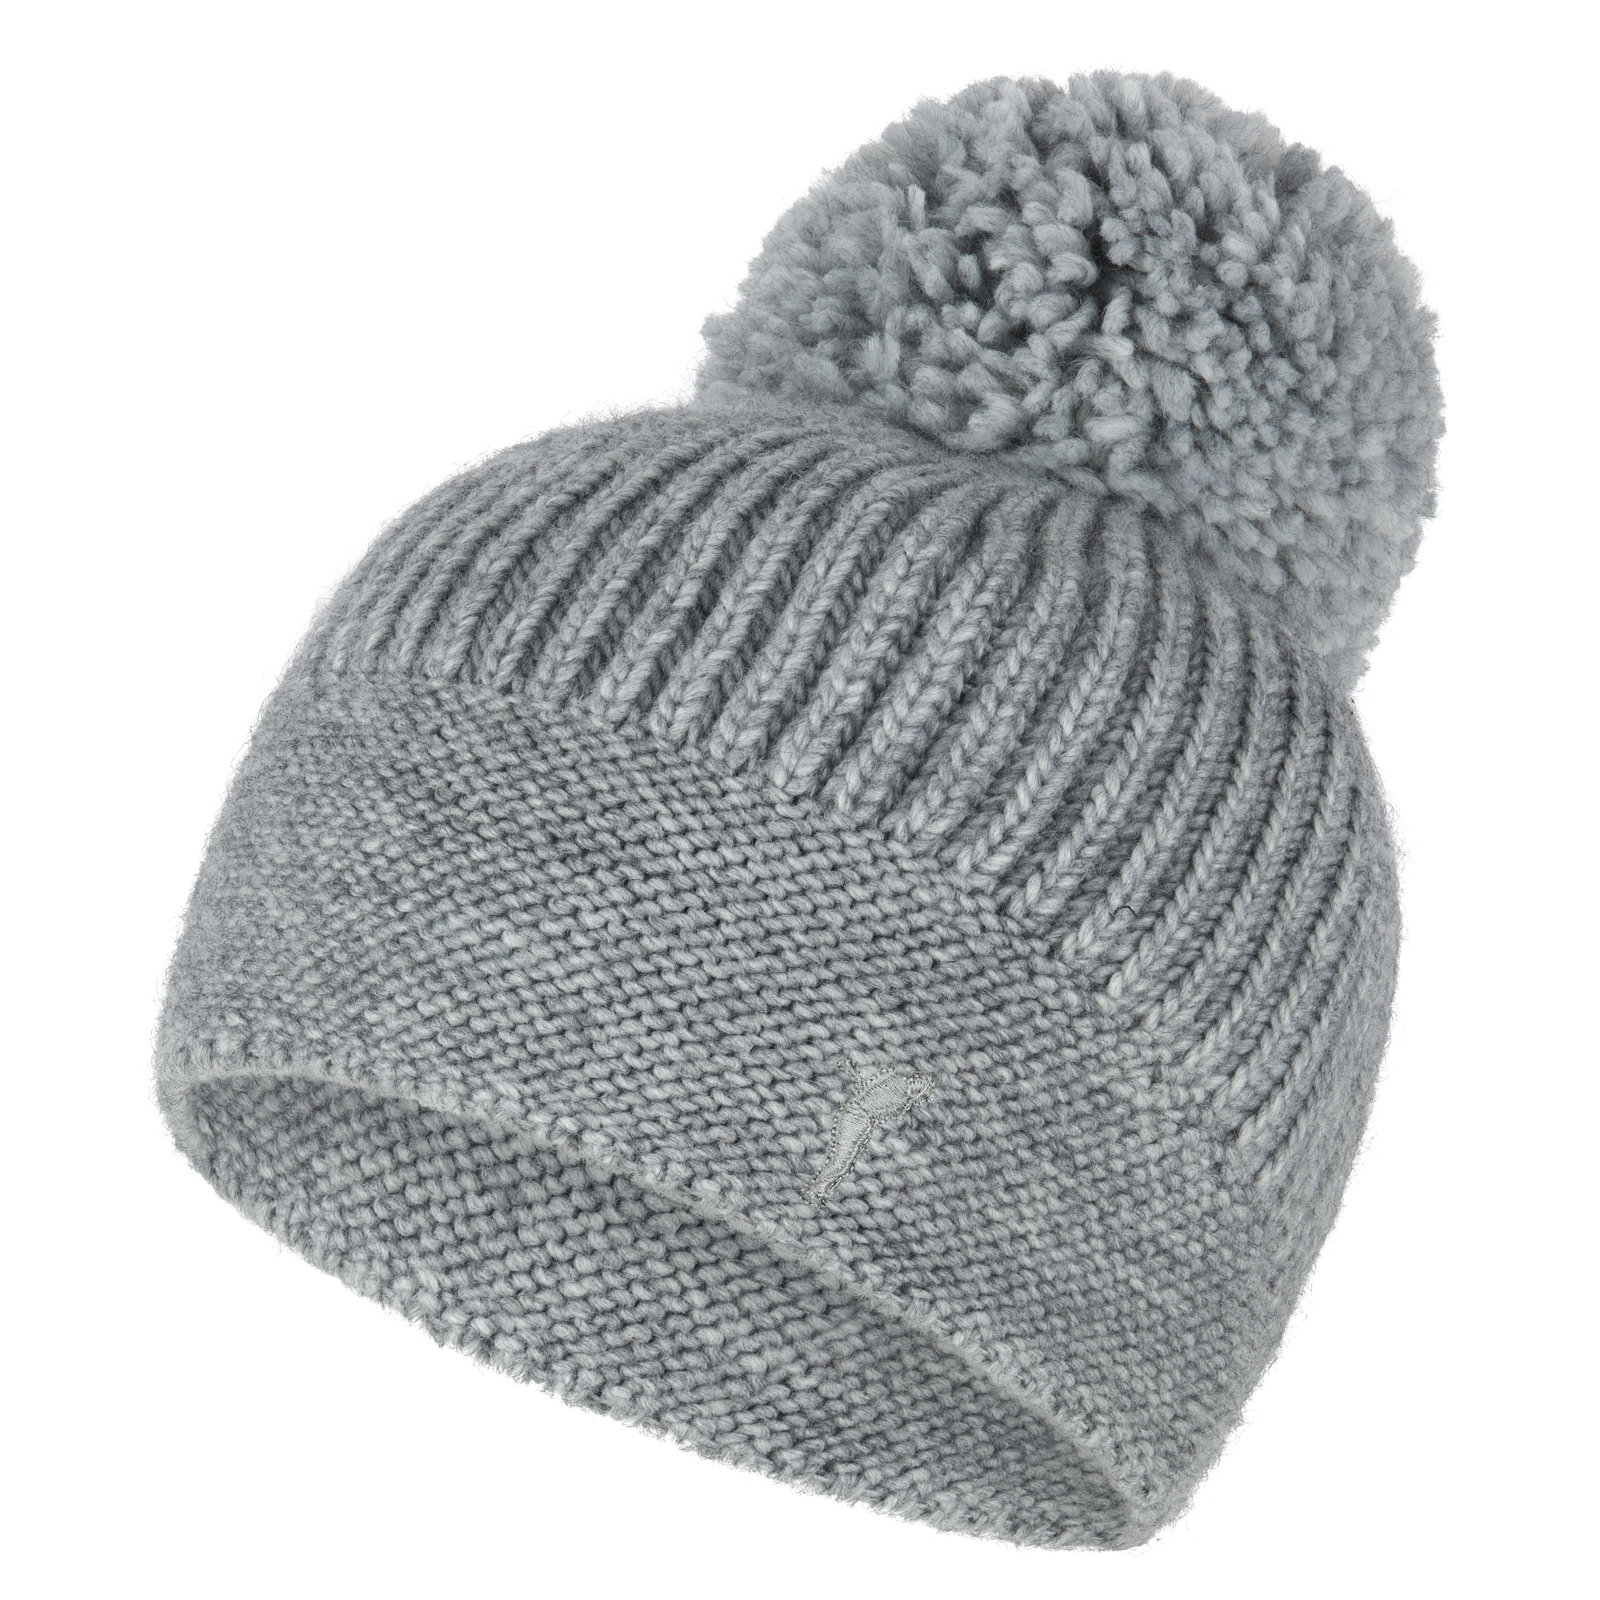 Ladies' warm knitted hat with pompom